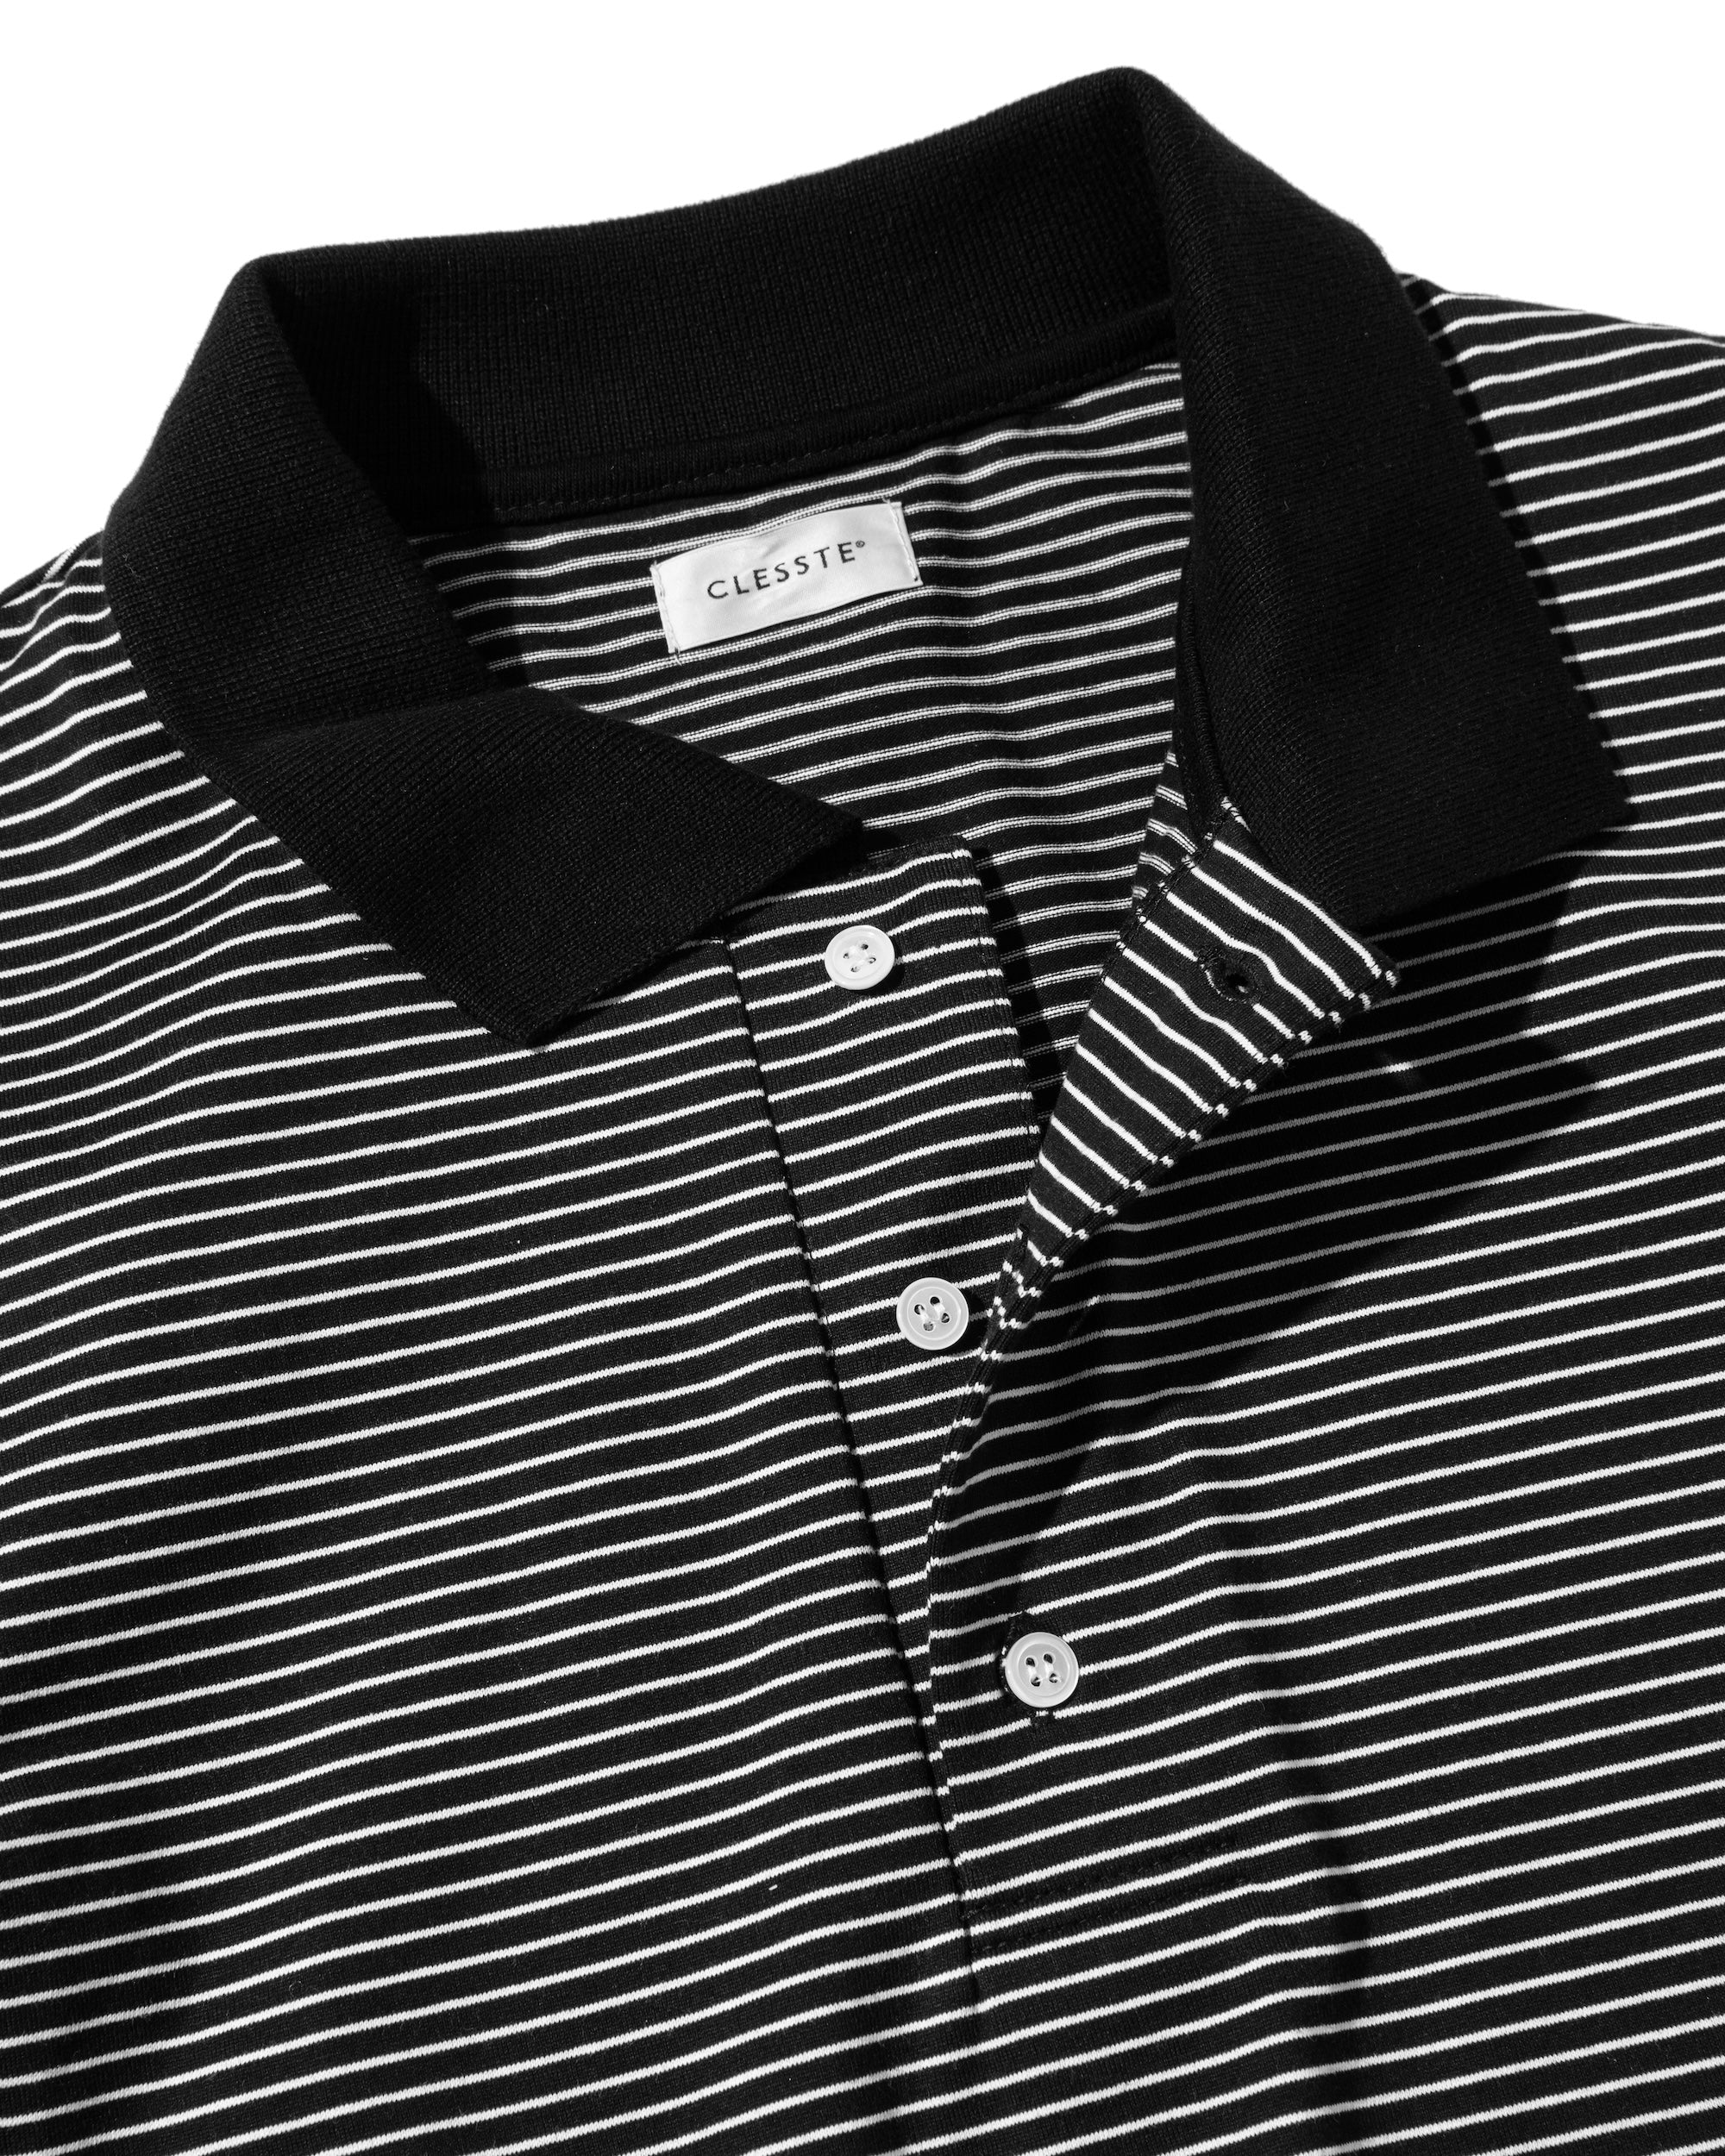 【4.27 SAT 20:00- IN STOCK】STRIPED MASSIVE L/S POLO SHIRT WITH DRAWSTRINGS